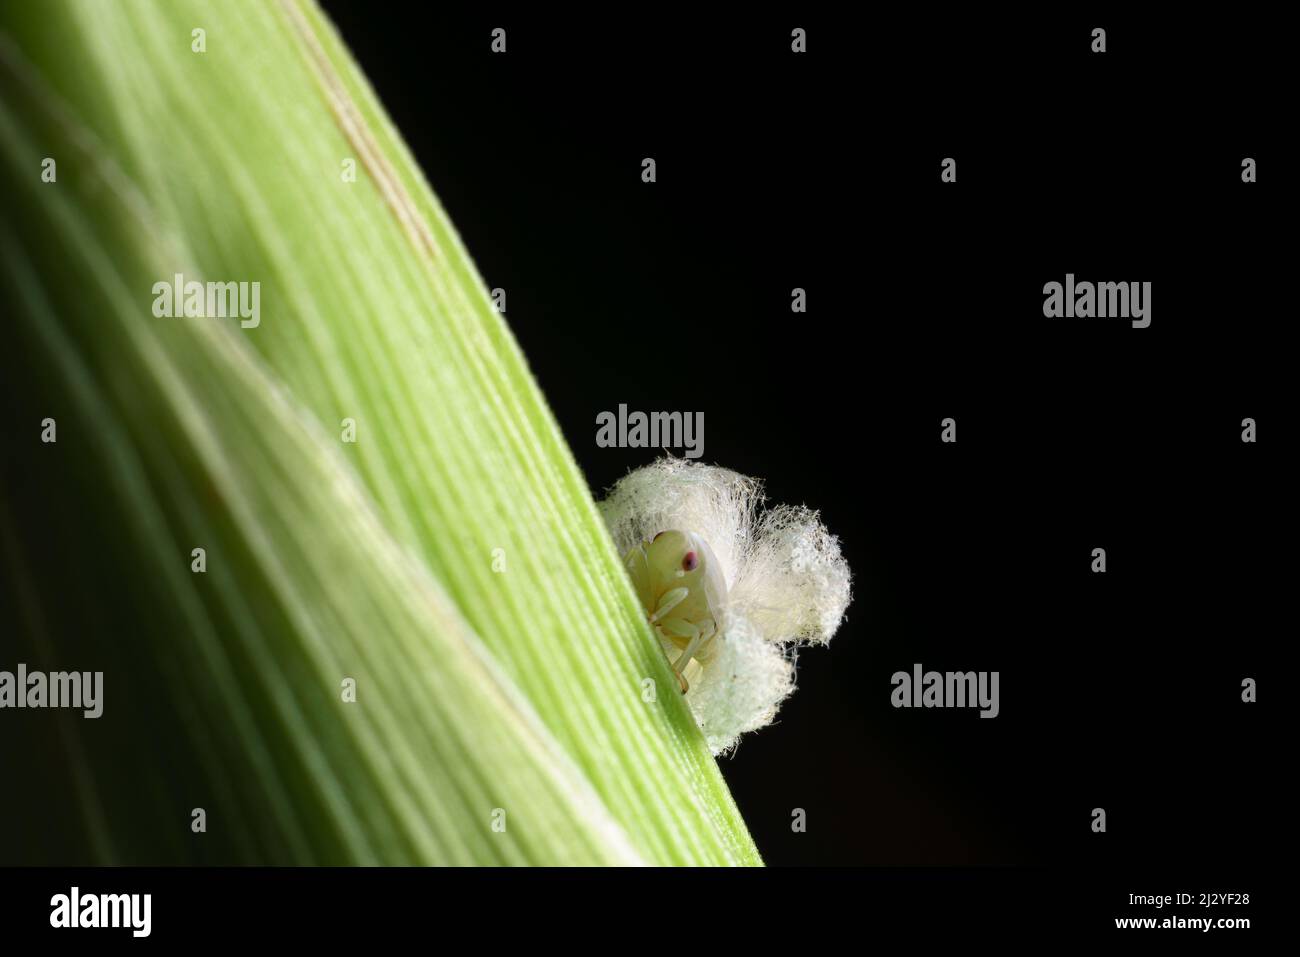 Extreme sharp and detailed portrait of Lawana conspersa at on a corn plant. Stock Photo